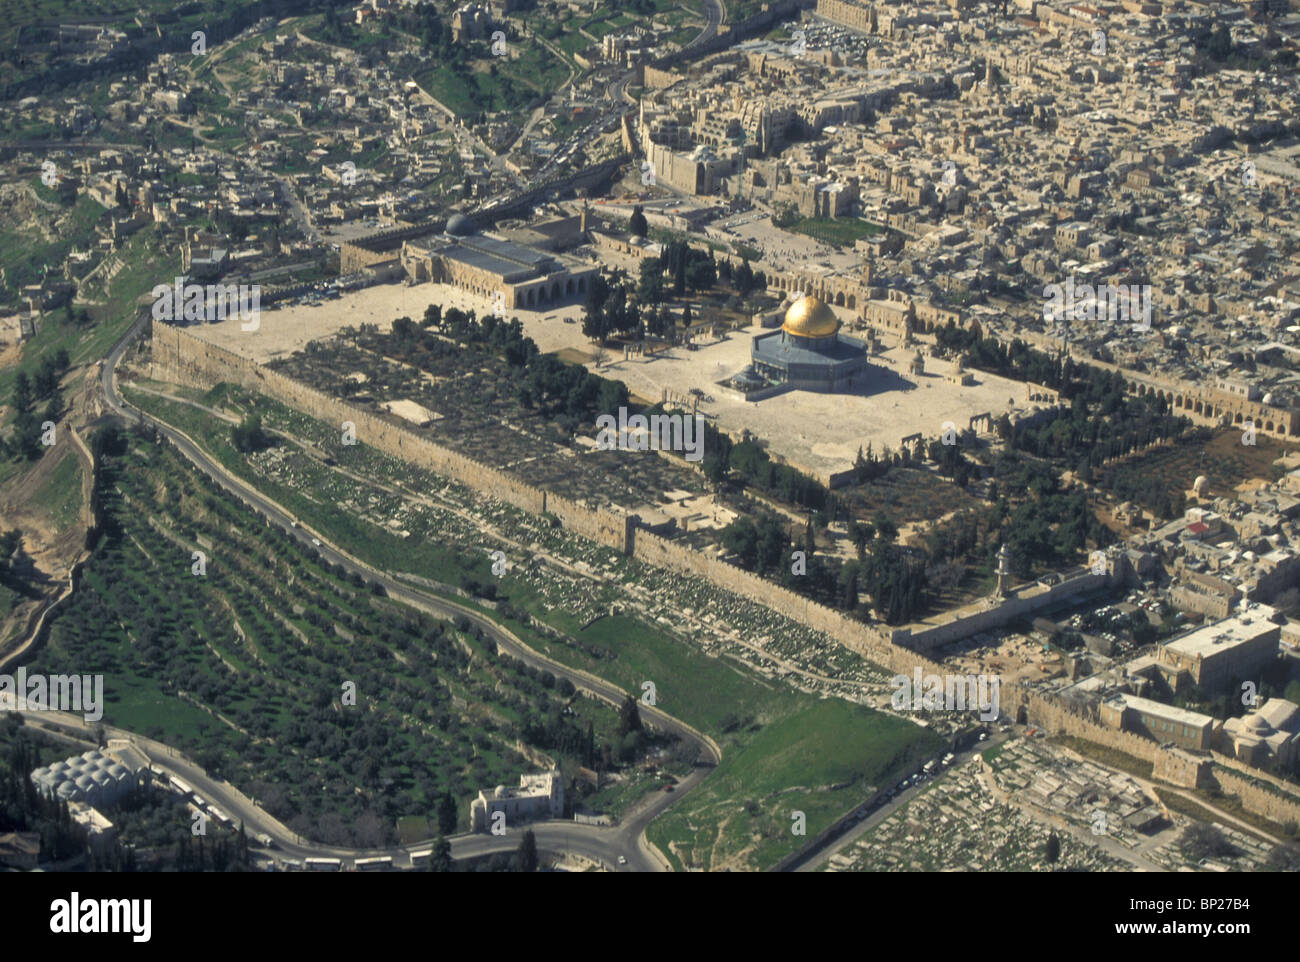 1621. JERUSALEM - VIEW FROM NORTH/EAST WITH THE TEMPLE MOUNT IN THE CENTER OF THE PICTURE Stock Photo